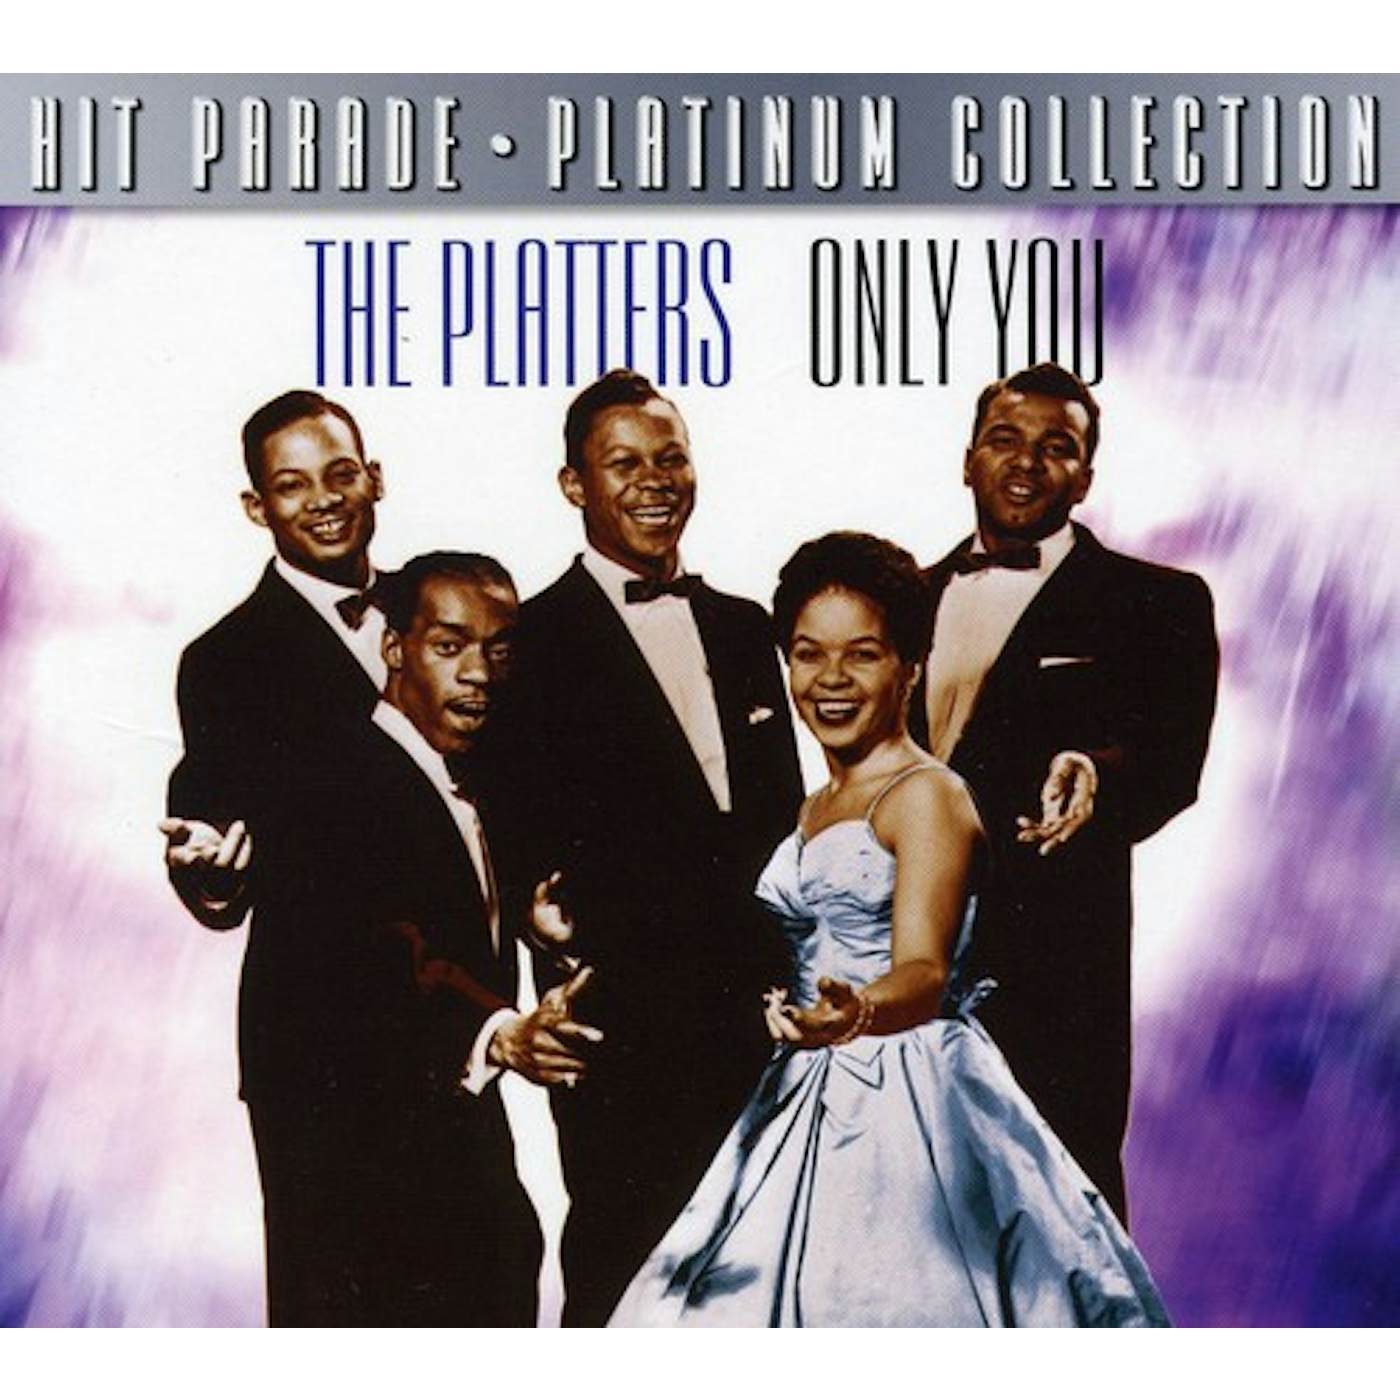 The Platters ONLY YOU CD